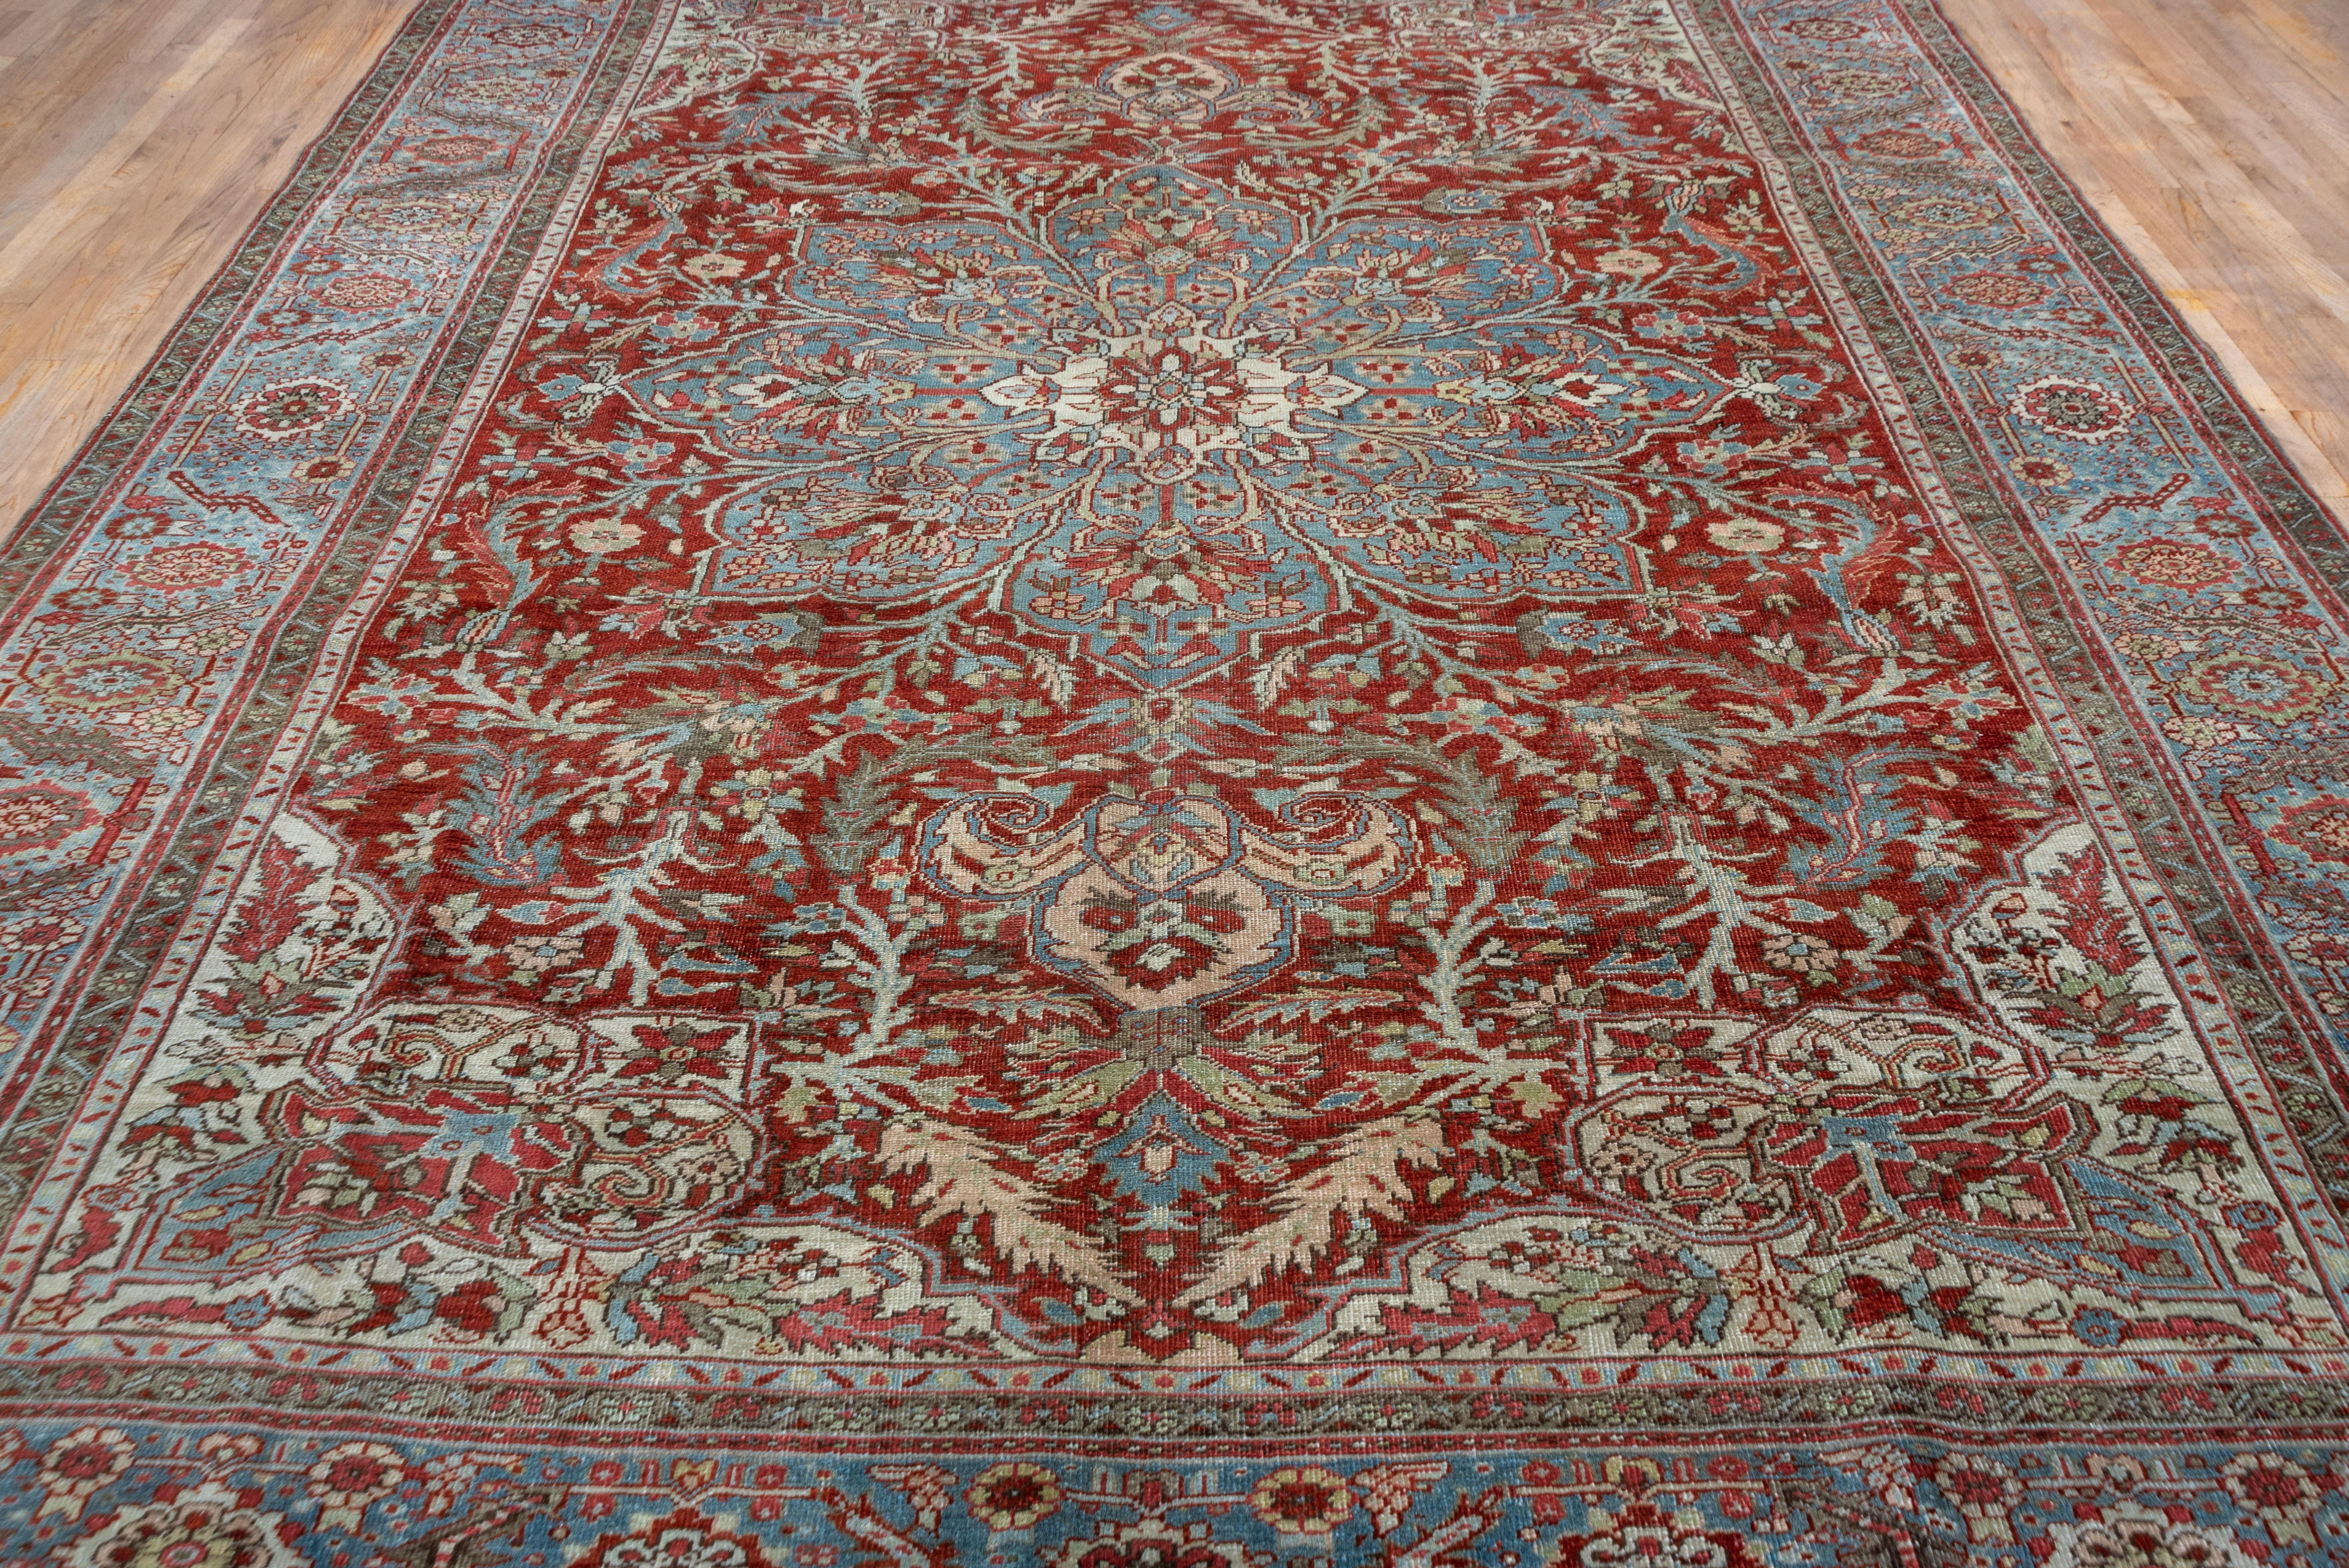 Heriz Serapi Finely Woven Antique Persian Heriz Rug, Red Outer Field Large, Unique Medallion For Sale